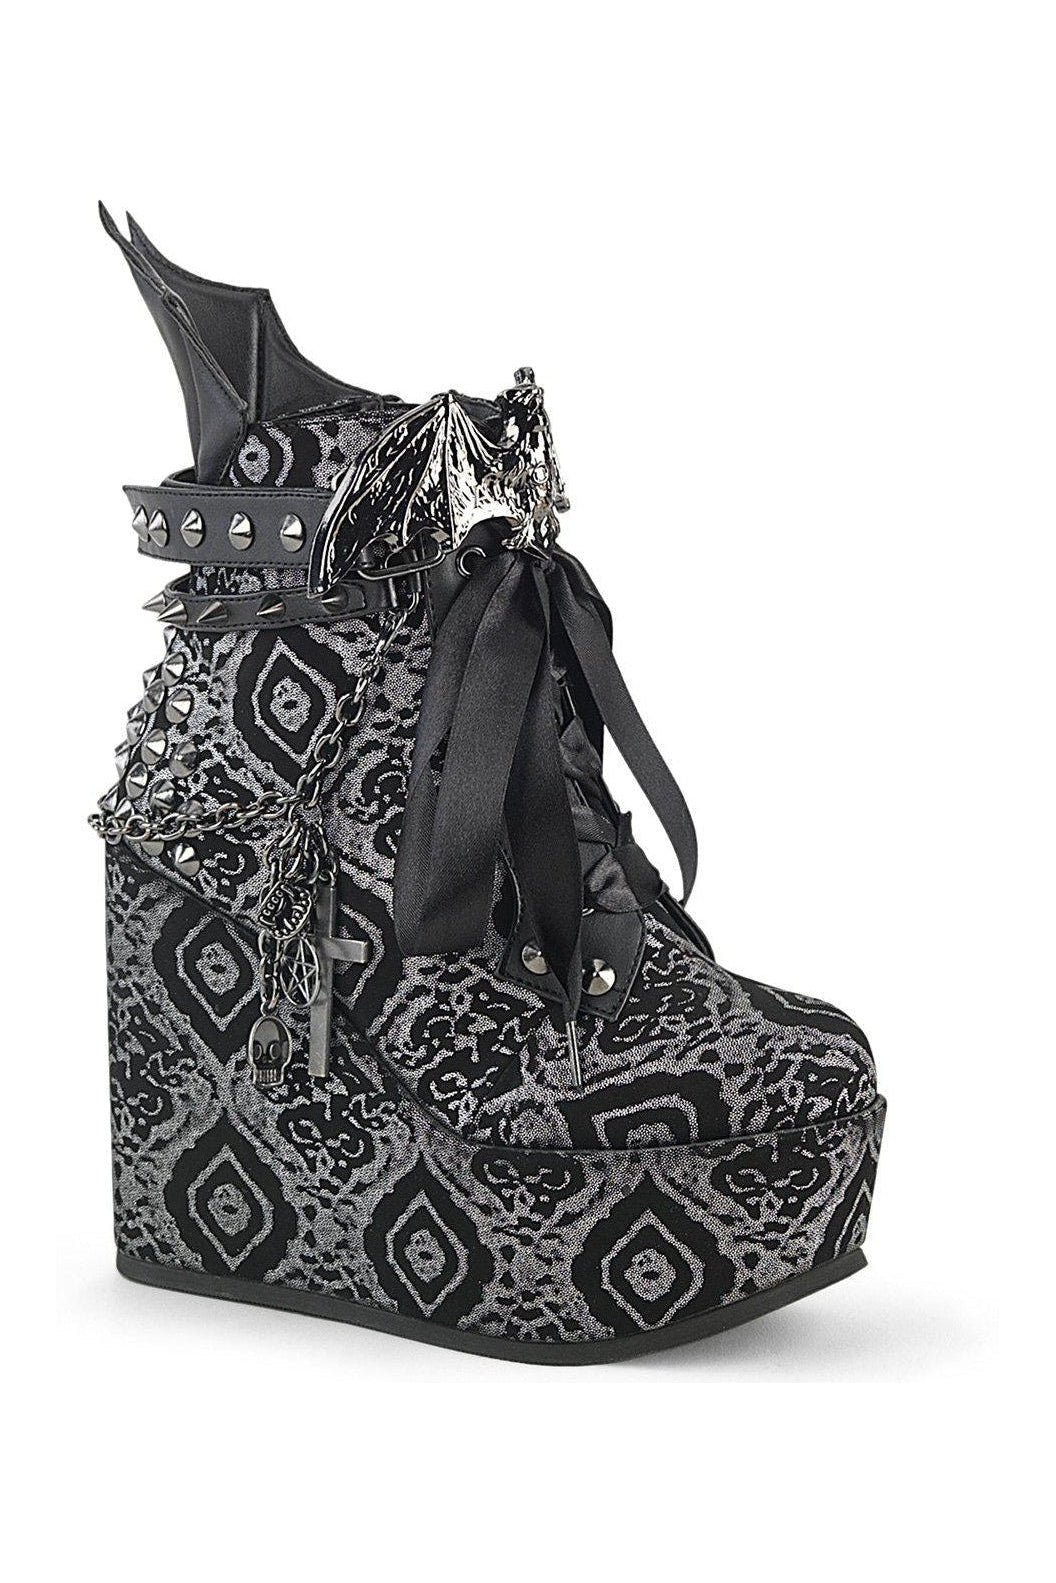 POISON-107 Ankle Boot | Blk-Silver Faux Nubuck Leather Faux Leather-Ankle Boots-Demonia-SEXYSHOES.COM